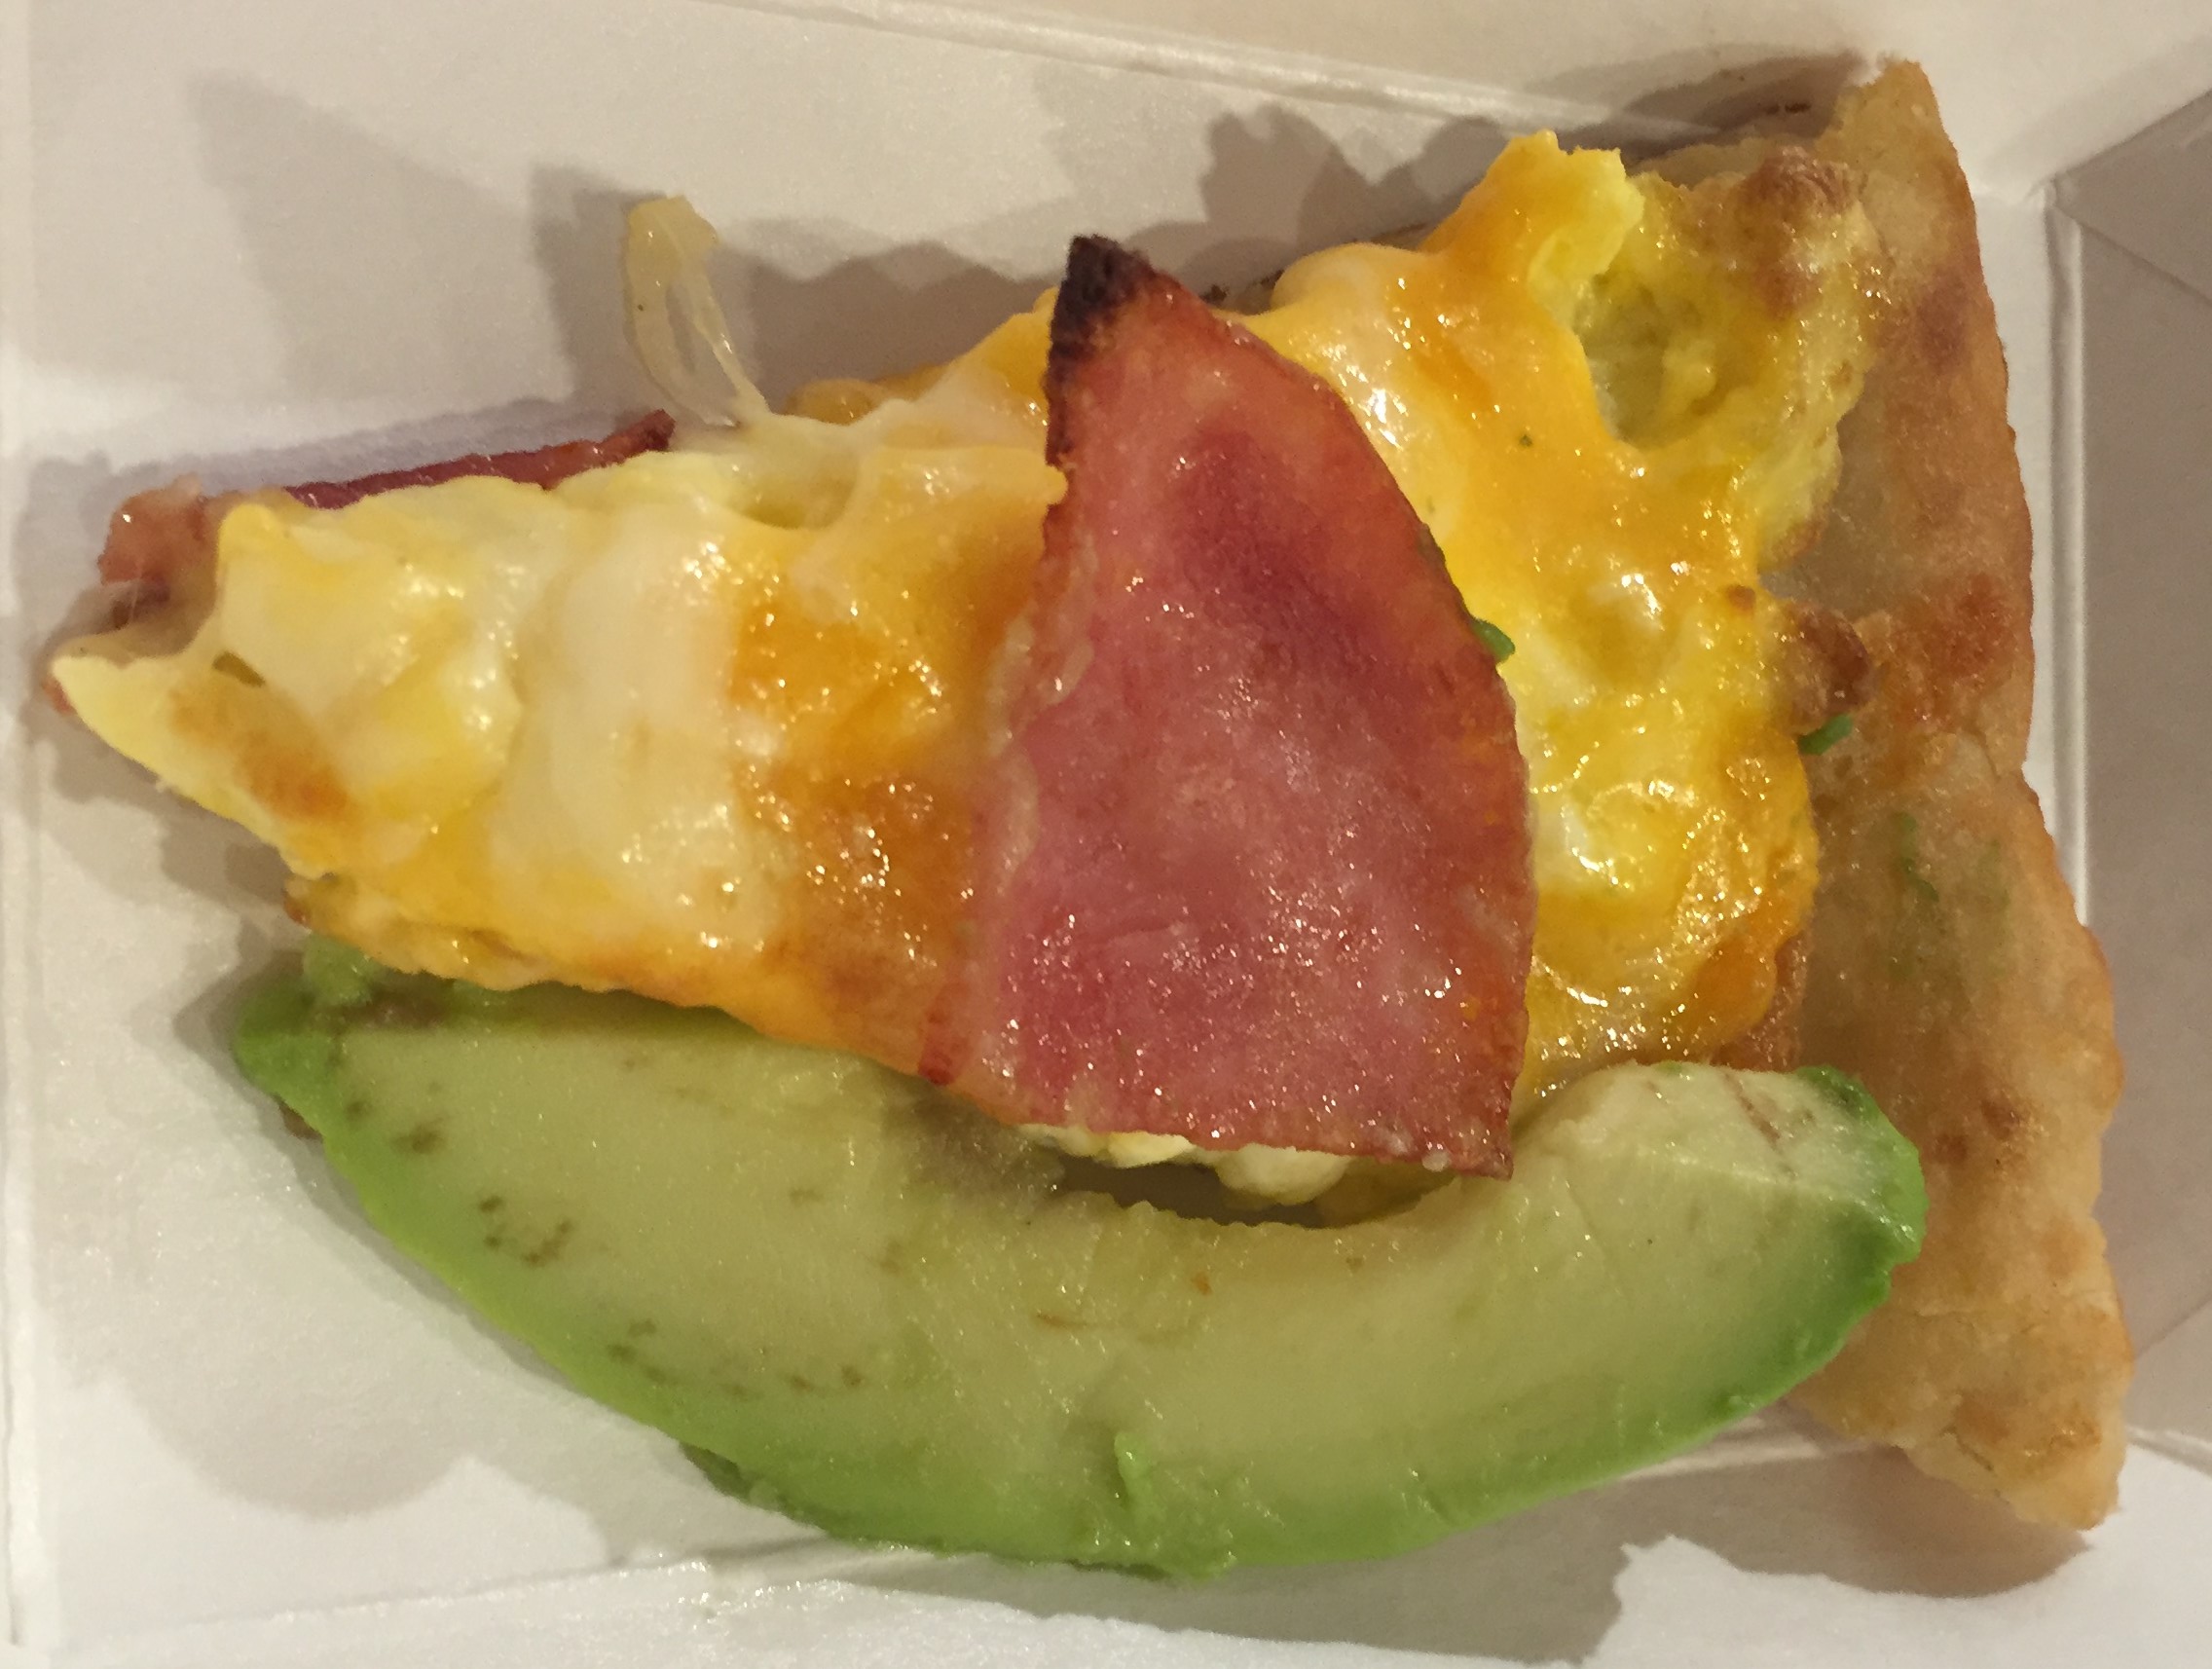 The first one was the Green Eggs and Ham.  This one has eggs, ham, cheese, and avocado. It was very good. JT loved it.